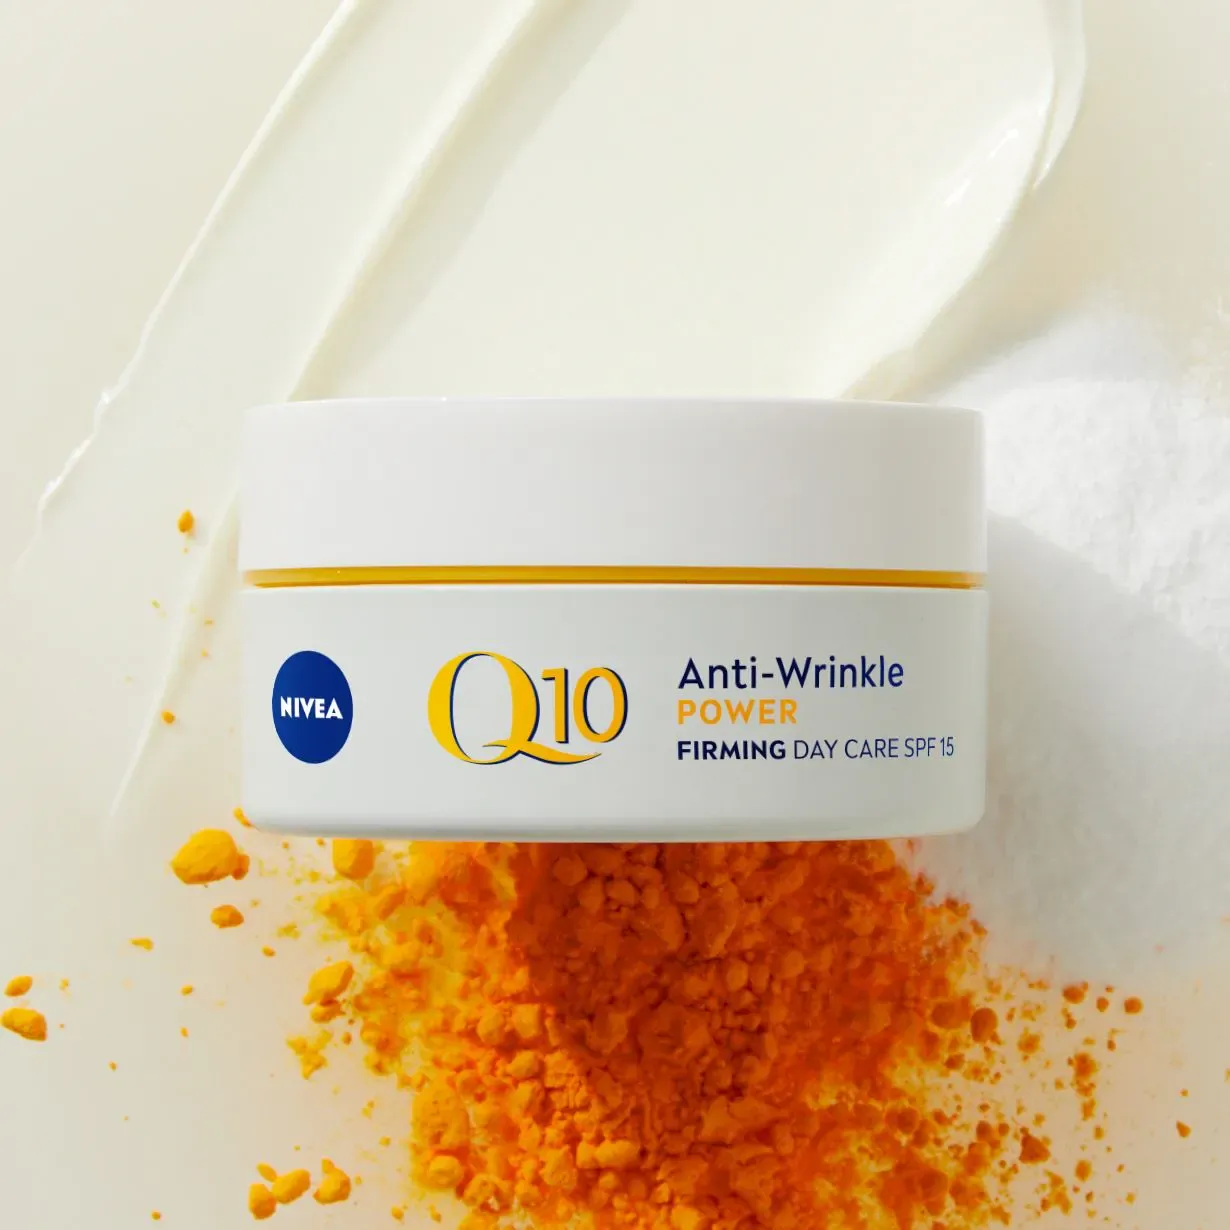 NIVEA Q10 Anti-Wrinkle Power Firming Day Care SPF 15